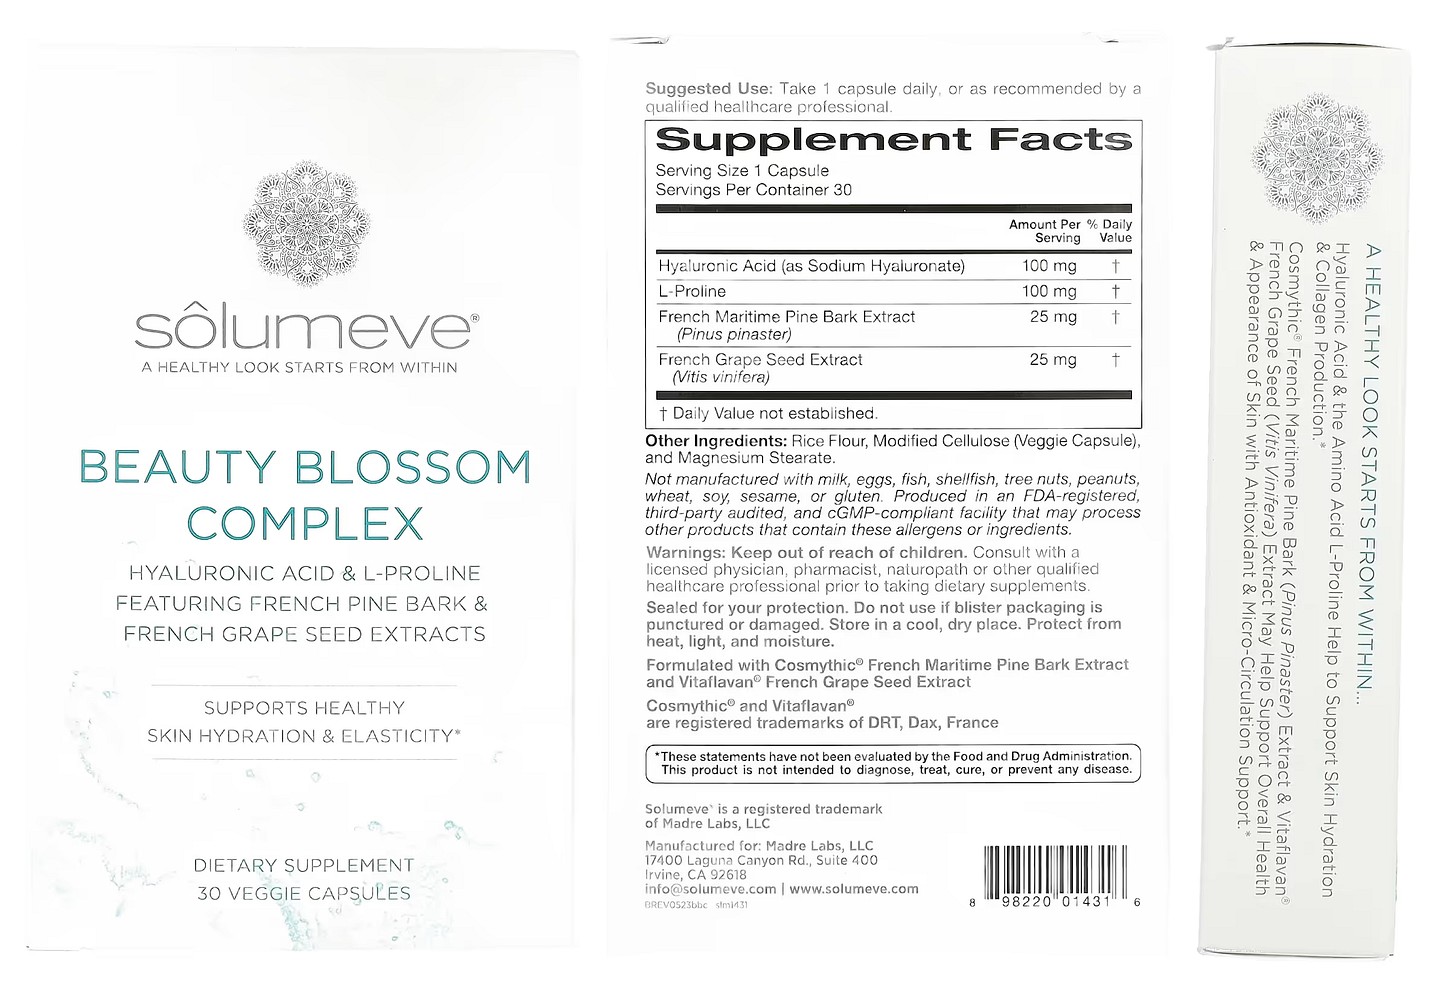 Solumeve, Beauty Blossom Complex packaging